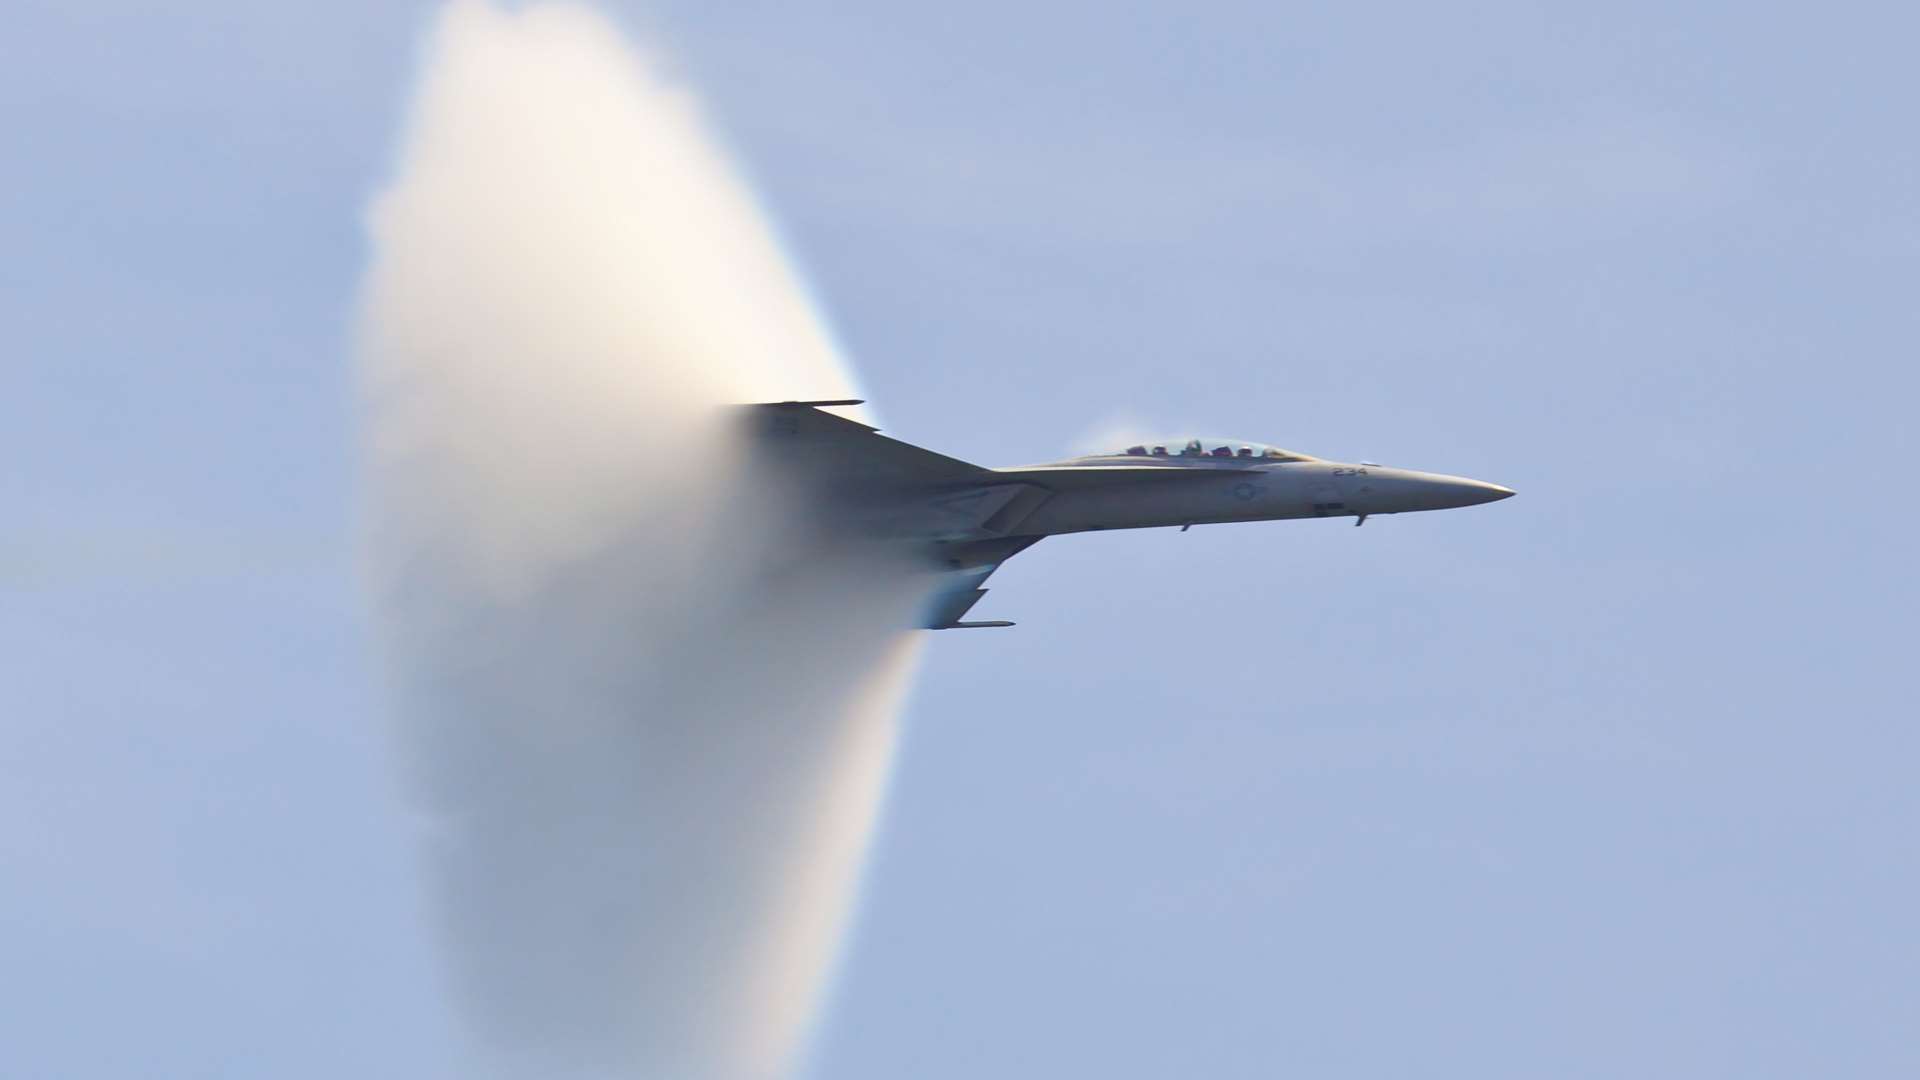 Some have reported the noise could have been caused by a sonic boom. Picture: Rypson